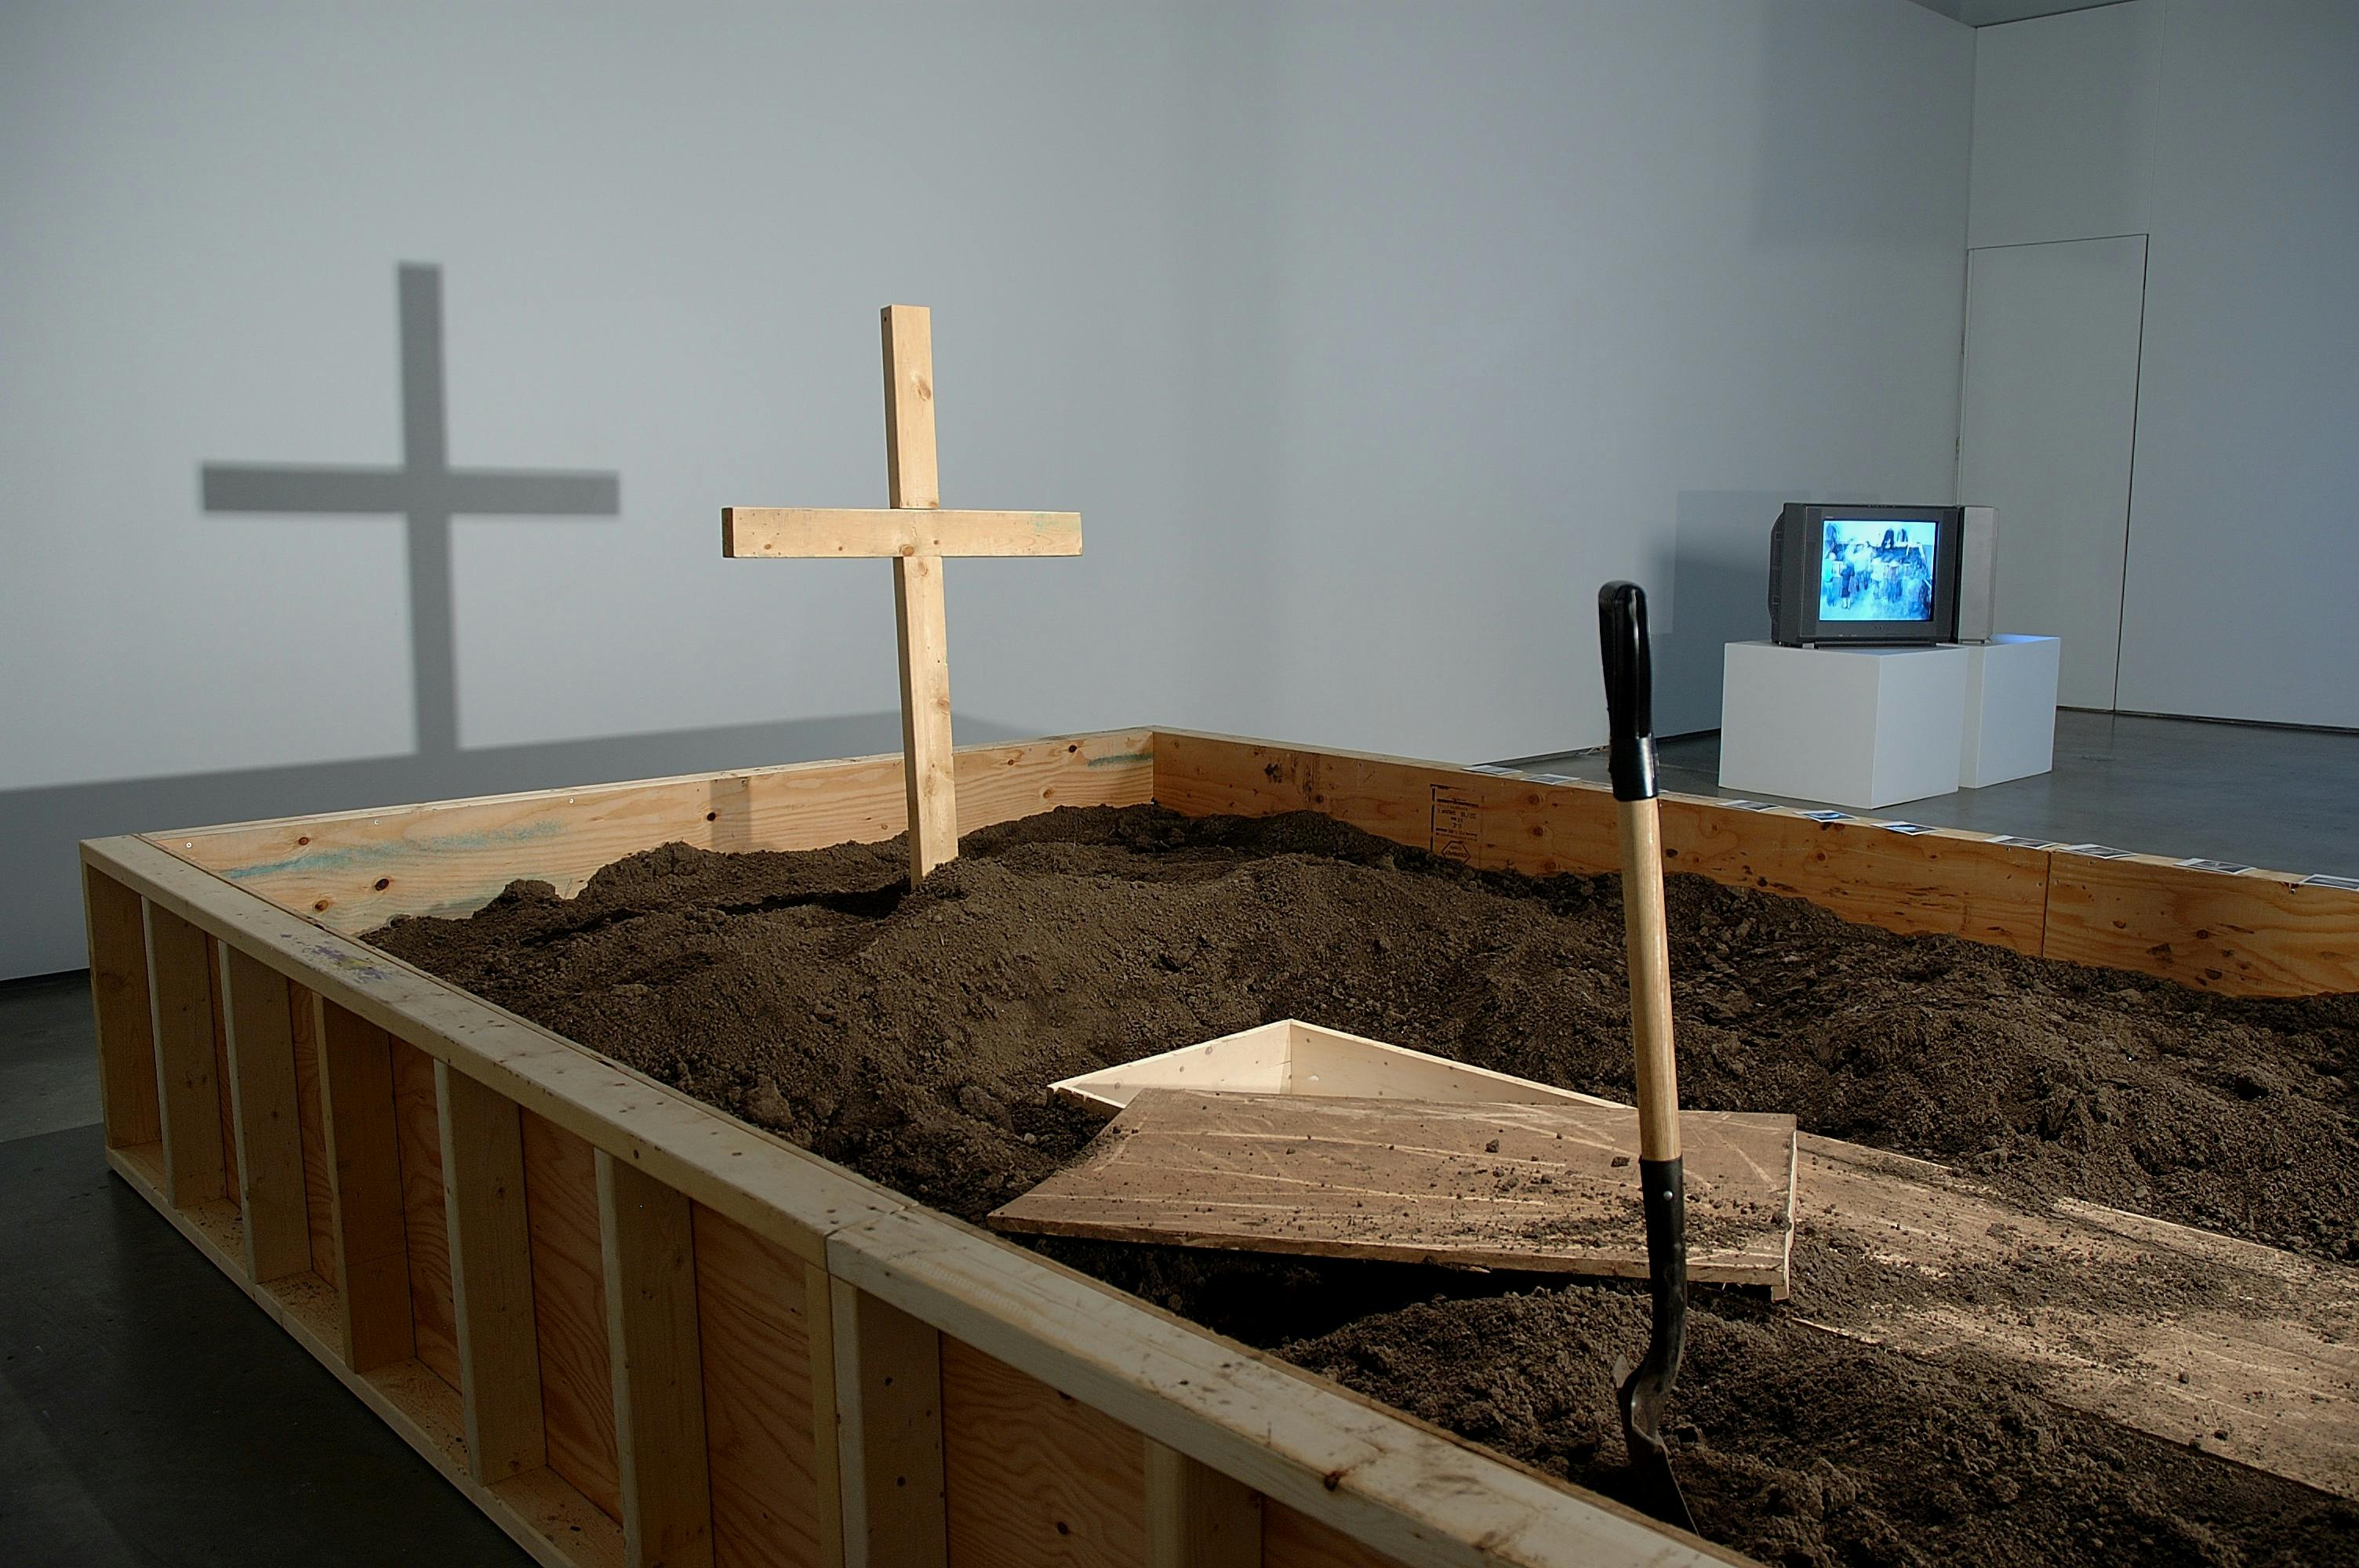 An installation image of a piece inside the gallery. A large unsealed wood box is placed directly on the floor. The box is not sealed, and a large amount of soil fills it. A cross and shovels stick out of the soil.